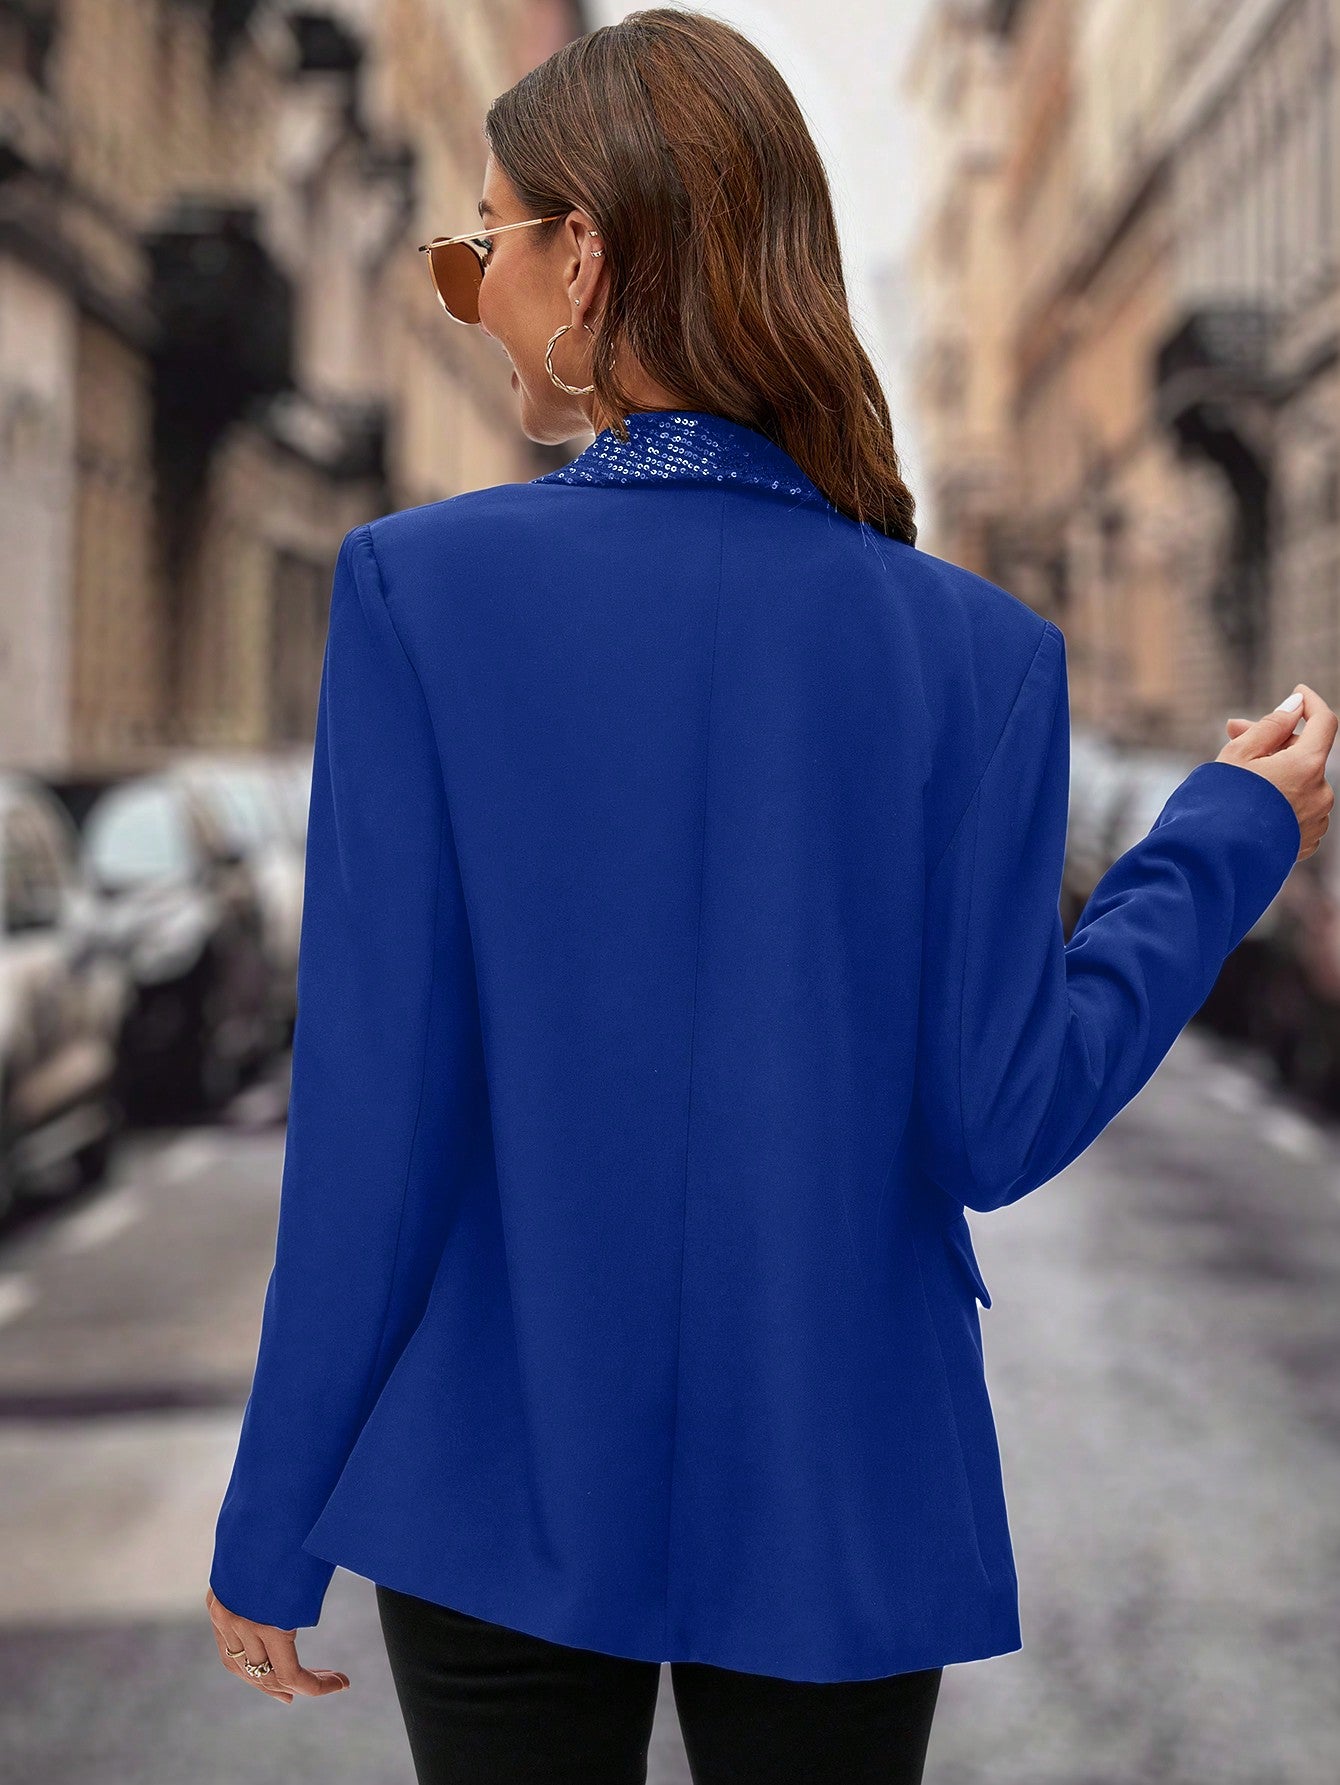 model from behind showing the back of her Blue sequin jacket blazer